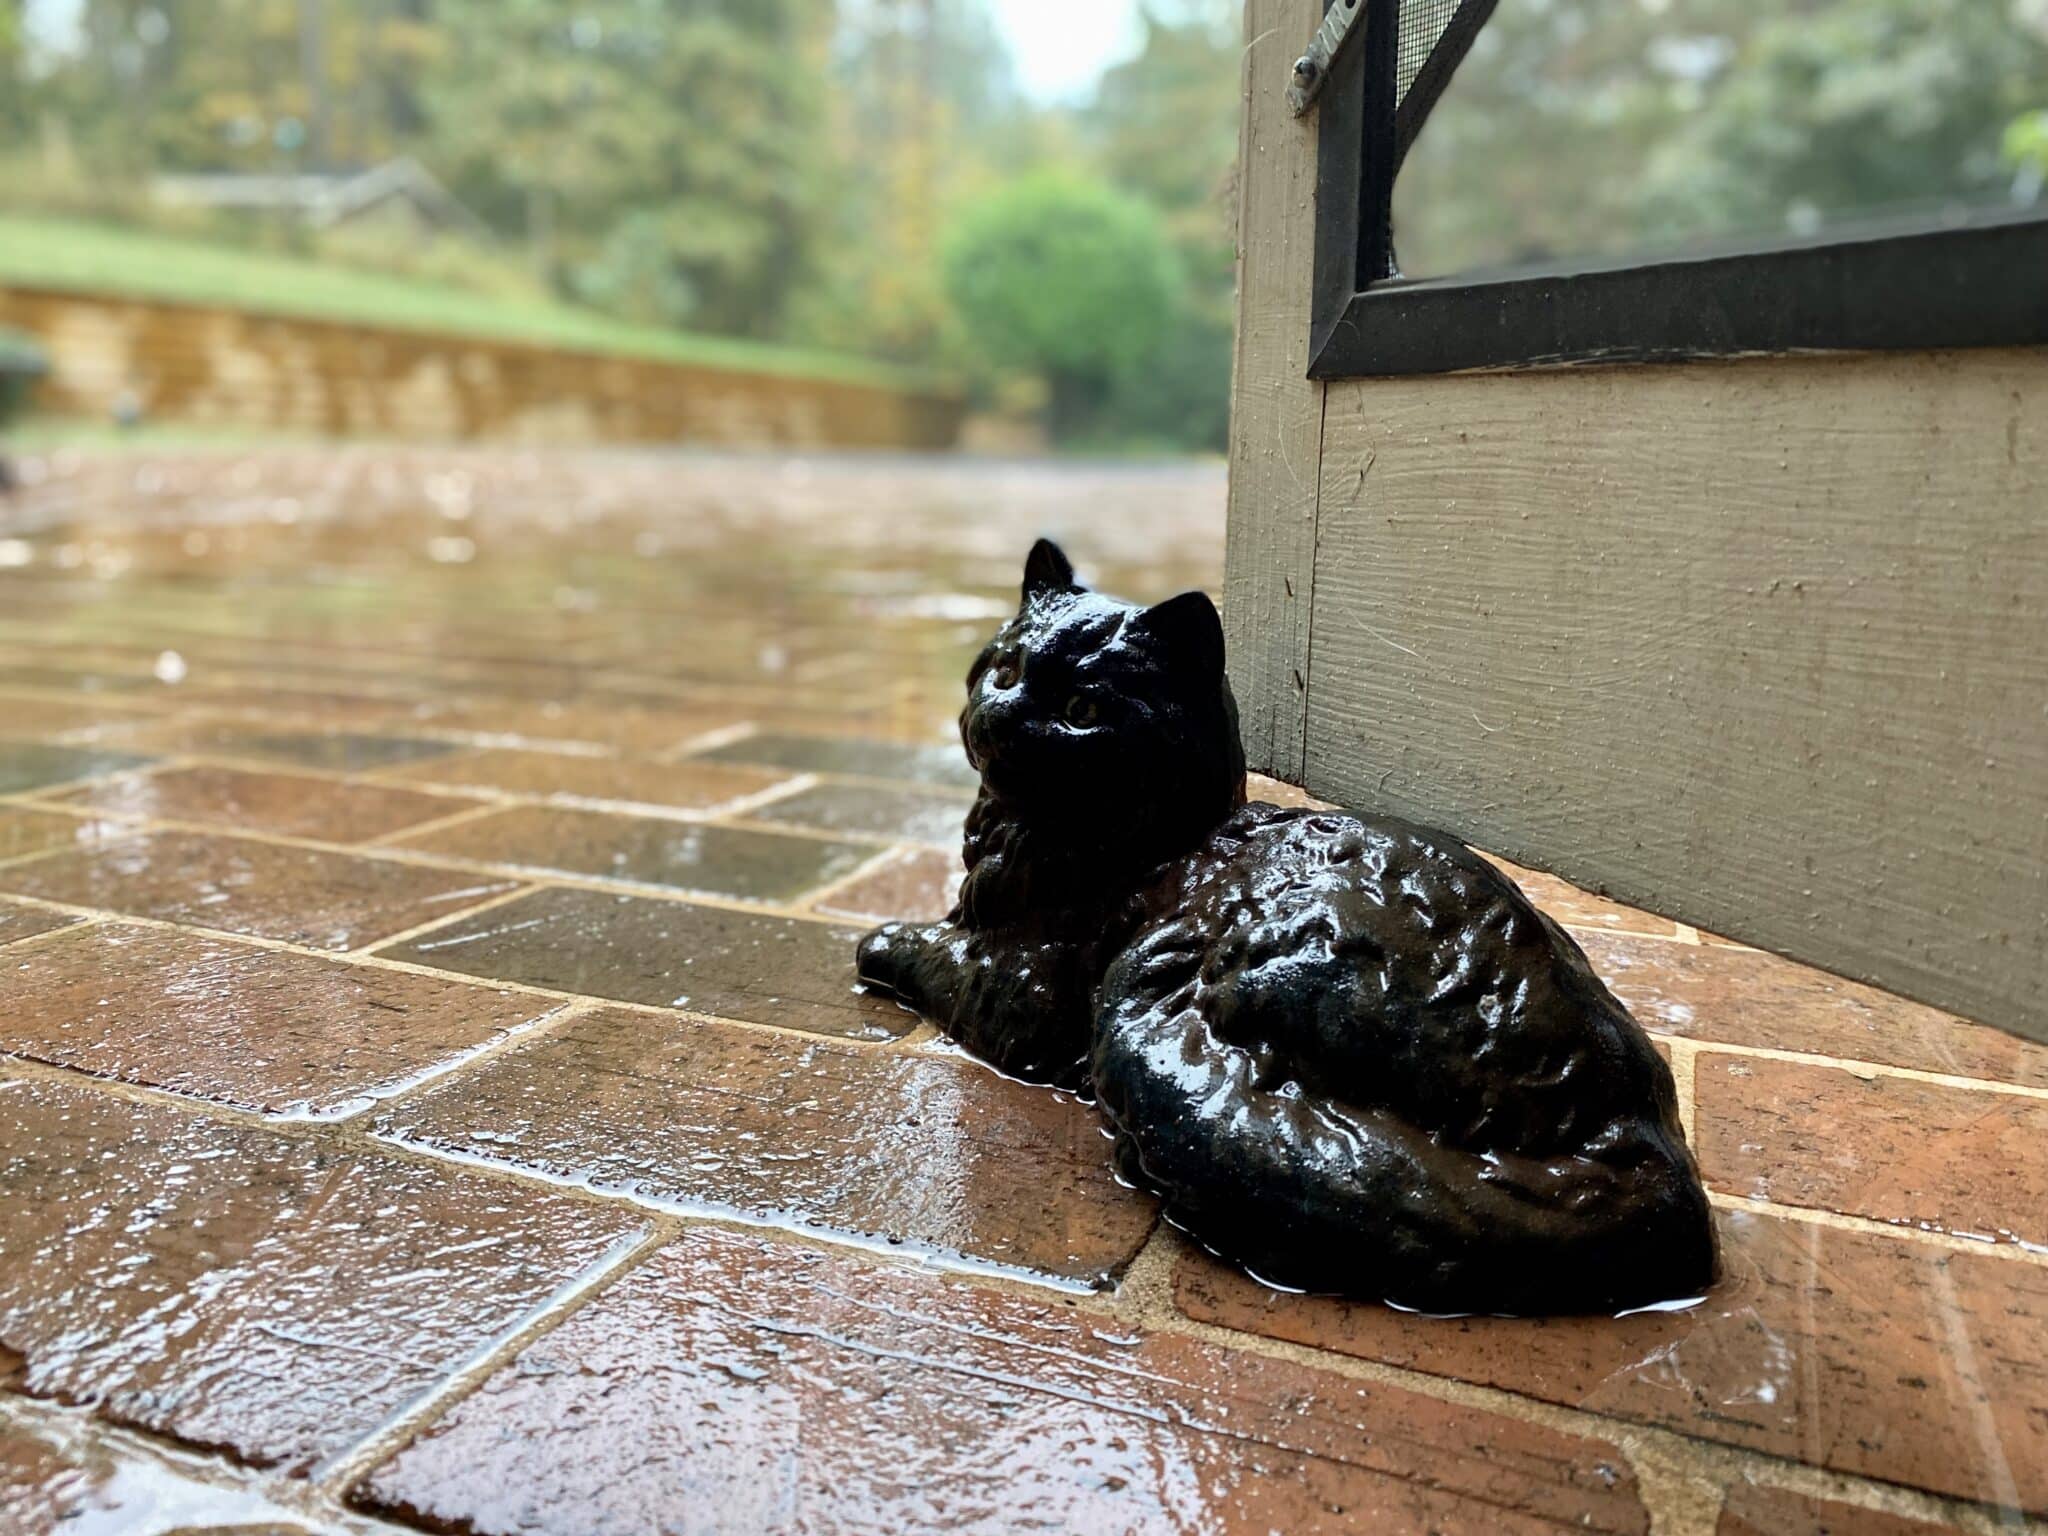 An iron cat statue holding a screened door open during the rain that we waited too long for